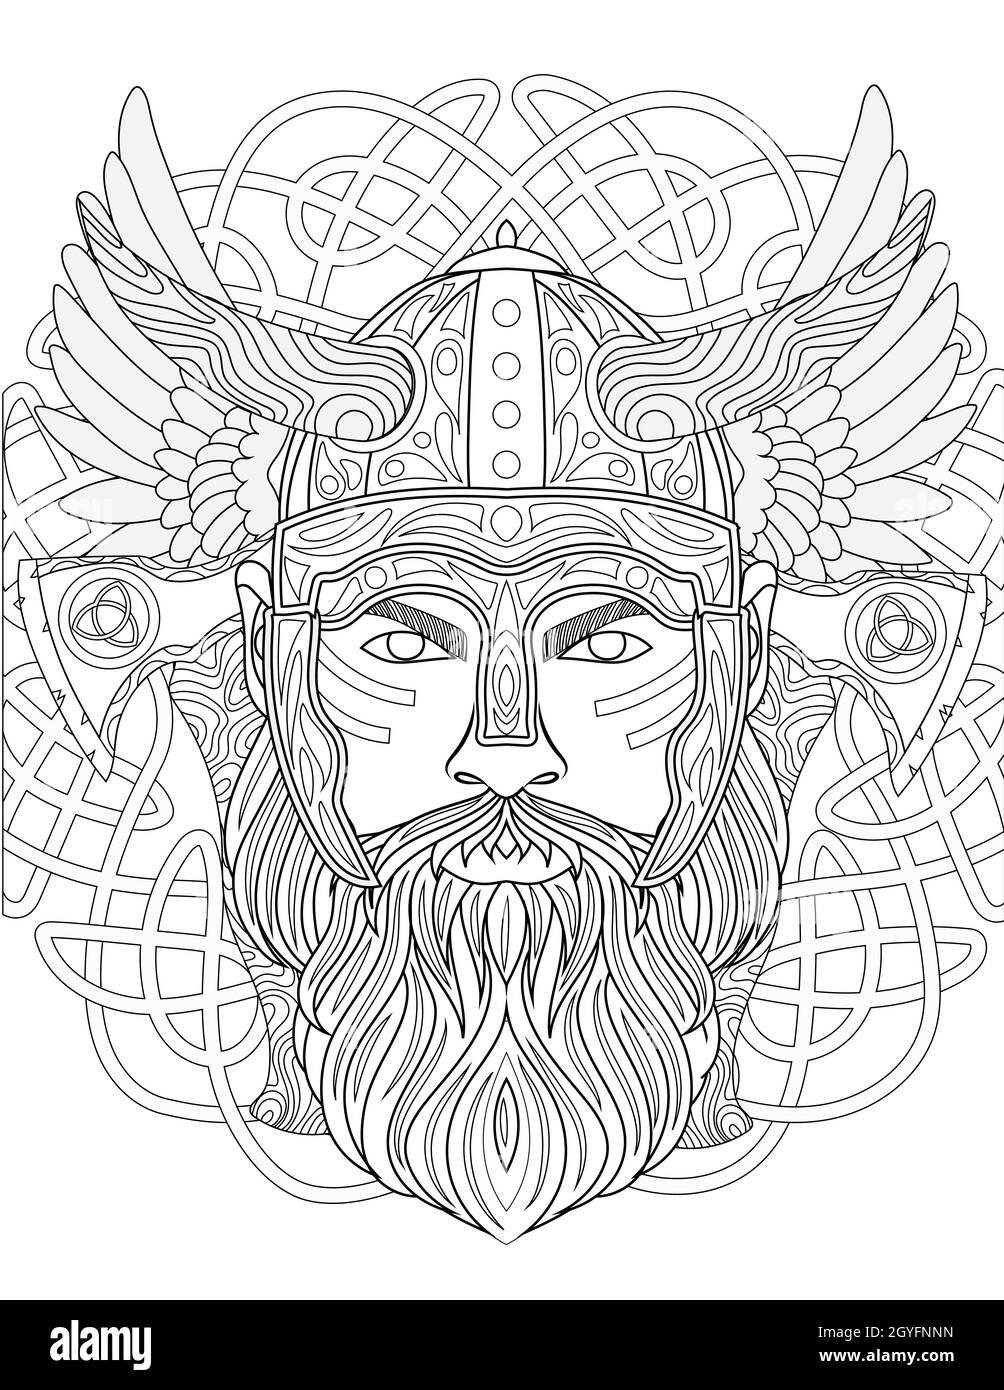 Line Drawing Of Barbarian Wearing Helmet With Horns Staring Forward. Stock Photo